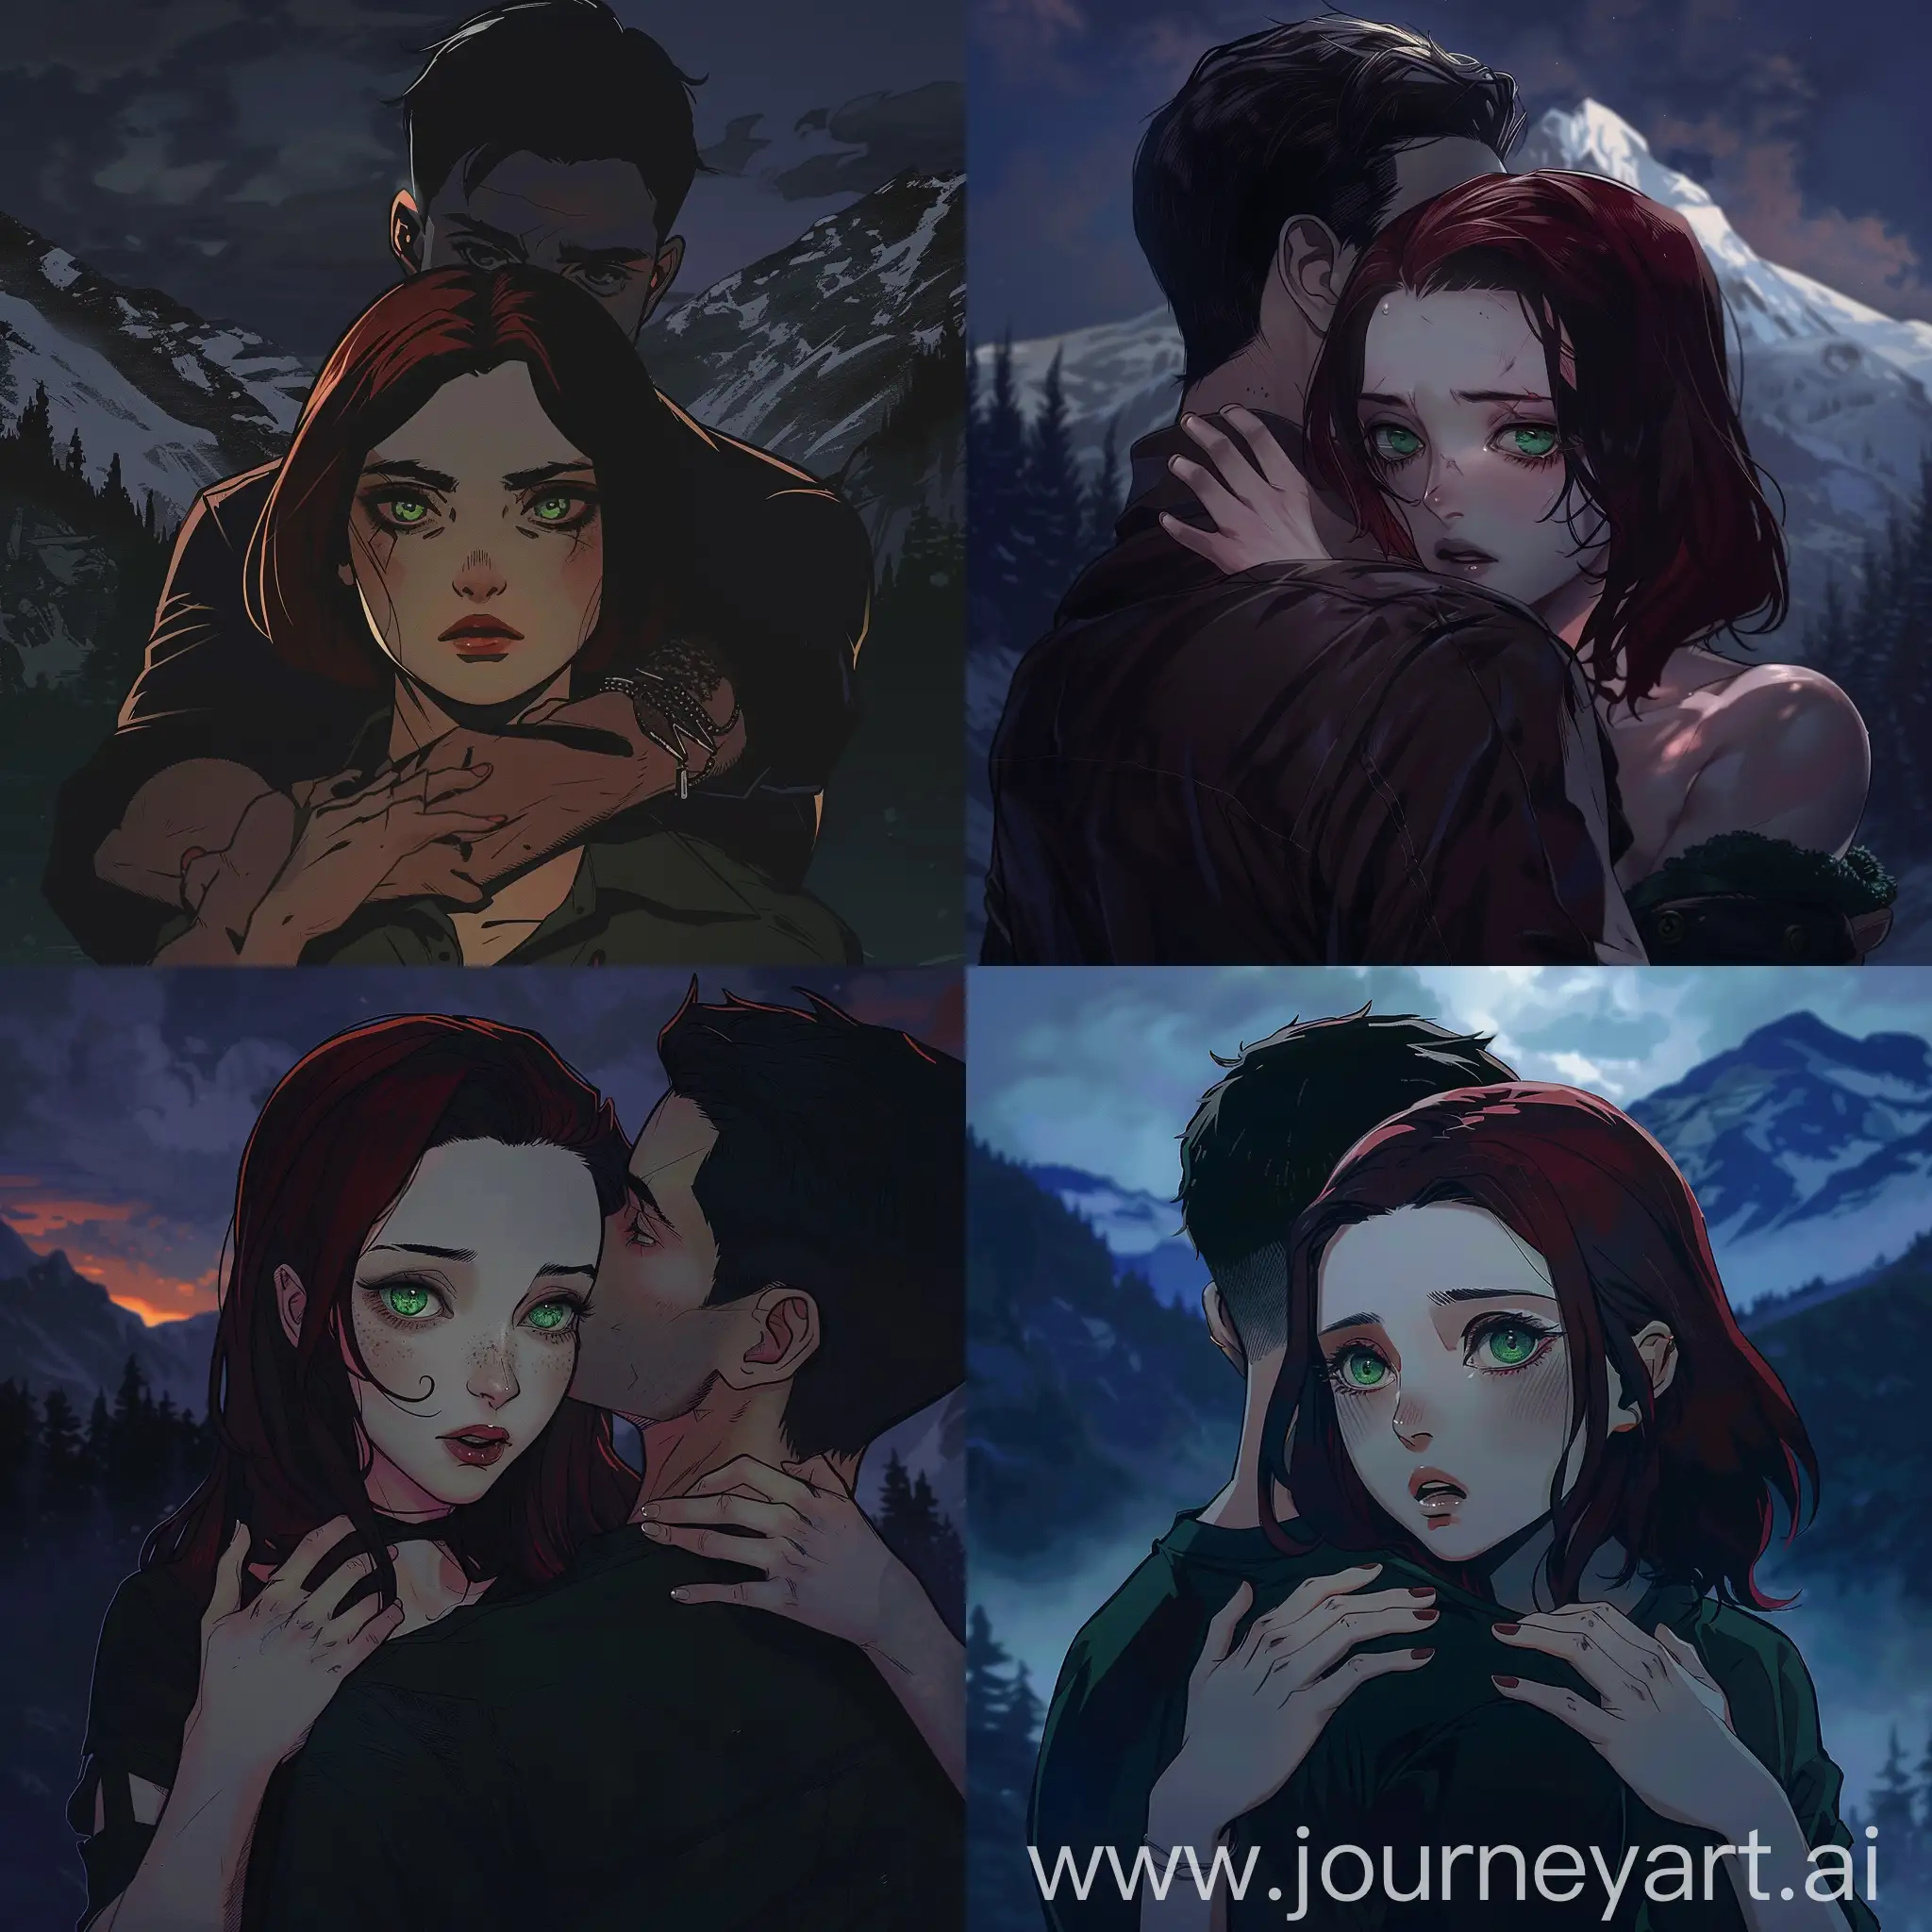 Romantic-Embrace-of-DarkRedHaired-Woman-and-Man-against-Mountain-Night-Sky